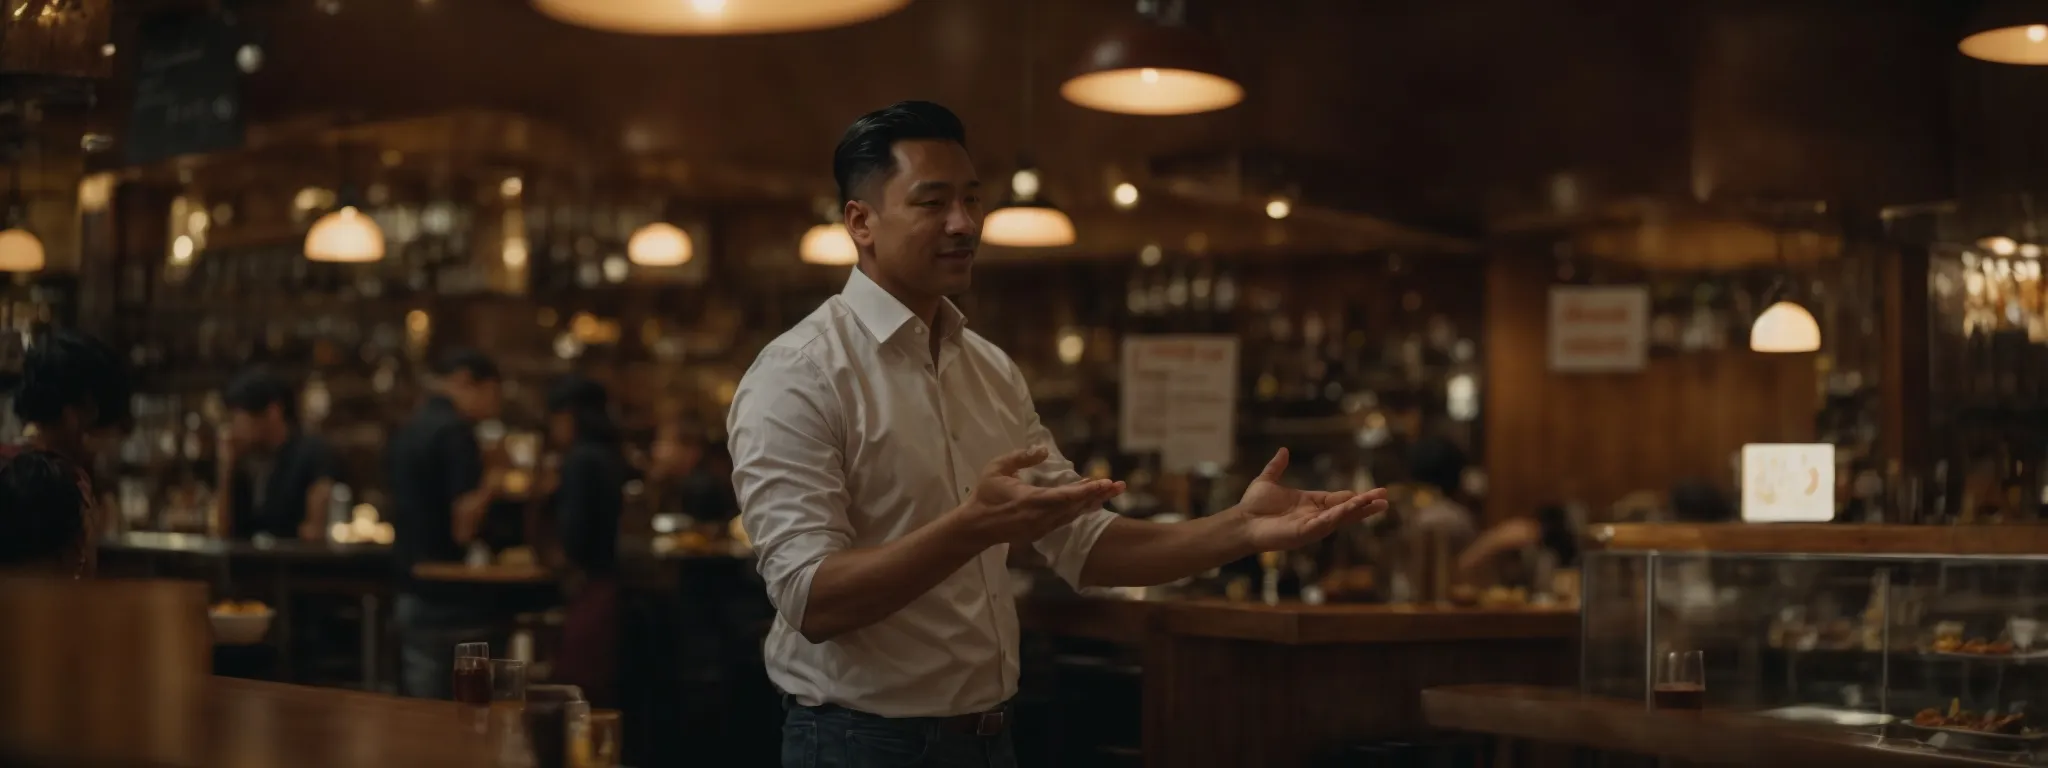 a restaurant owner gestures welcomingly in a bustling, well-lit bistro, where patrons dine and converse, symbolizing the confluence of hospitality and active engagement with customer reviews.